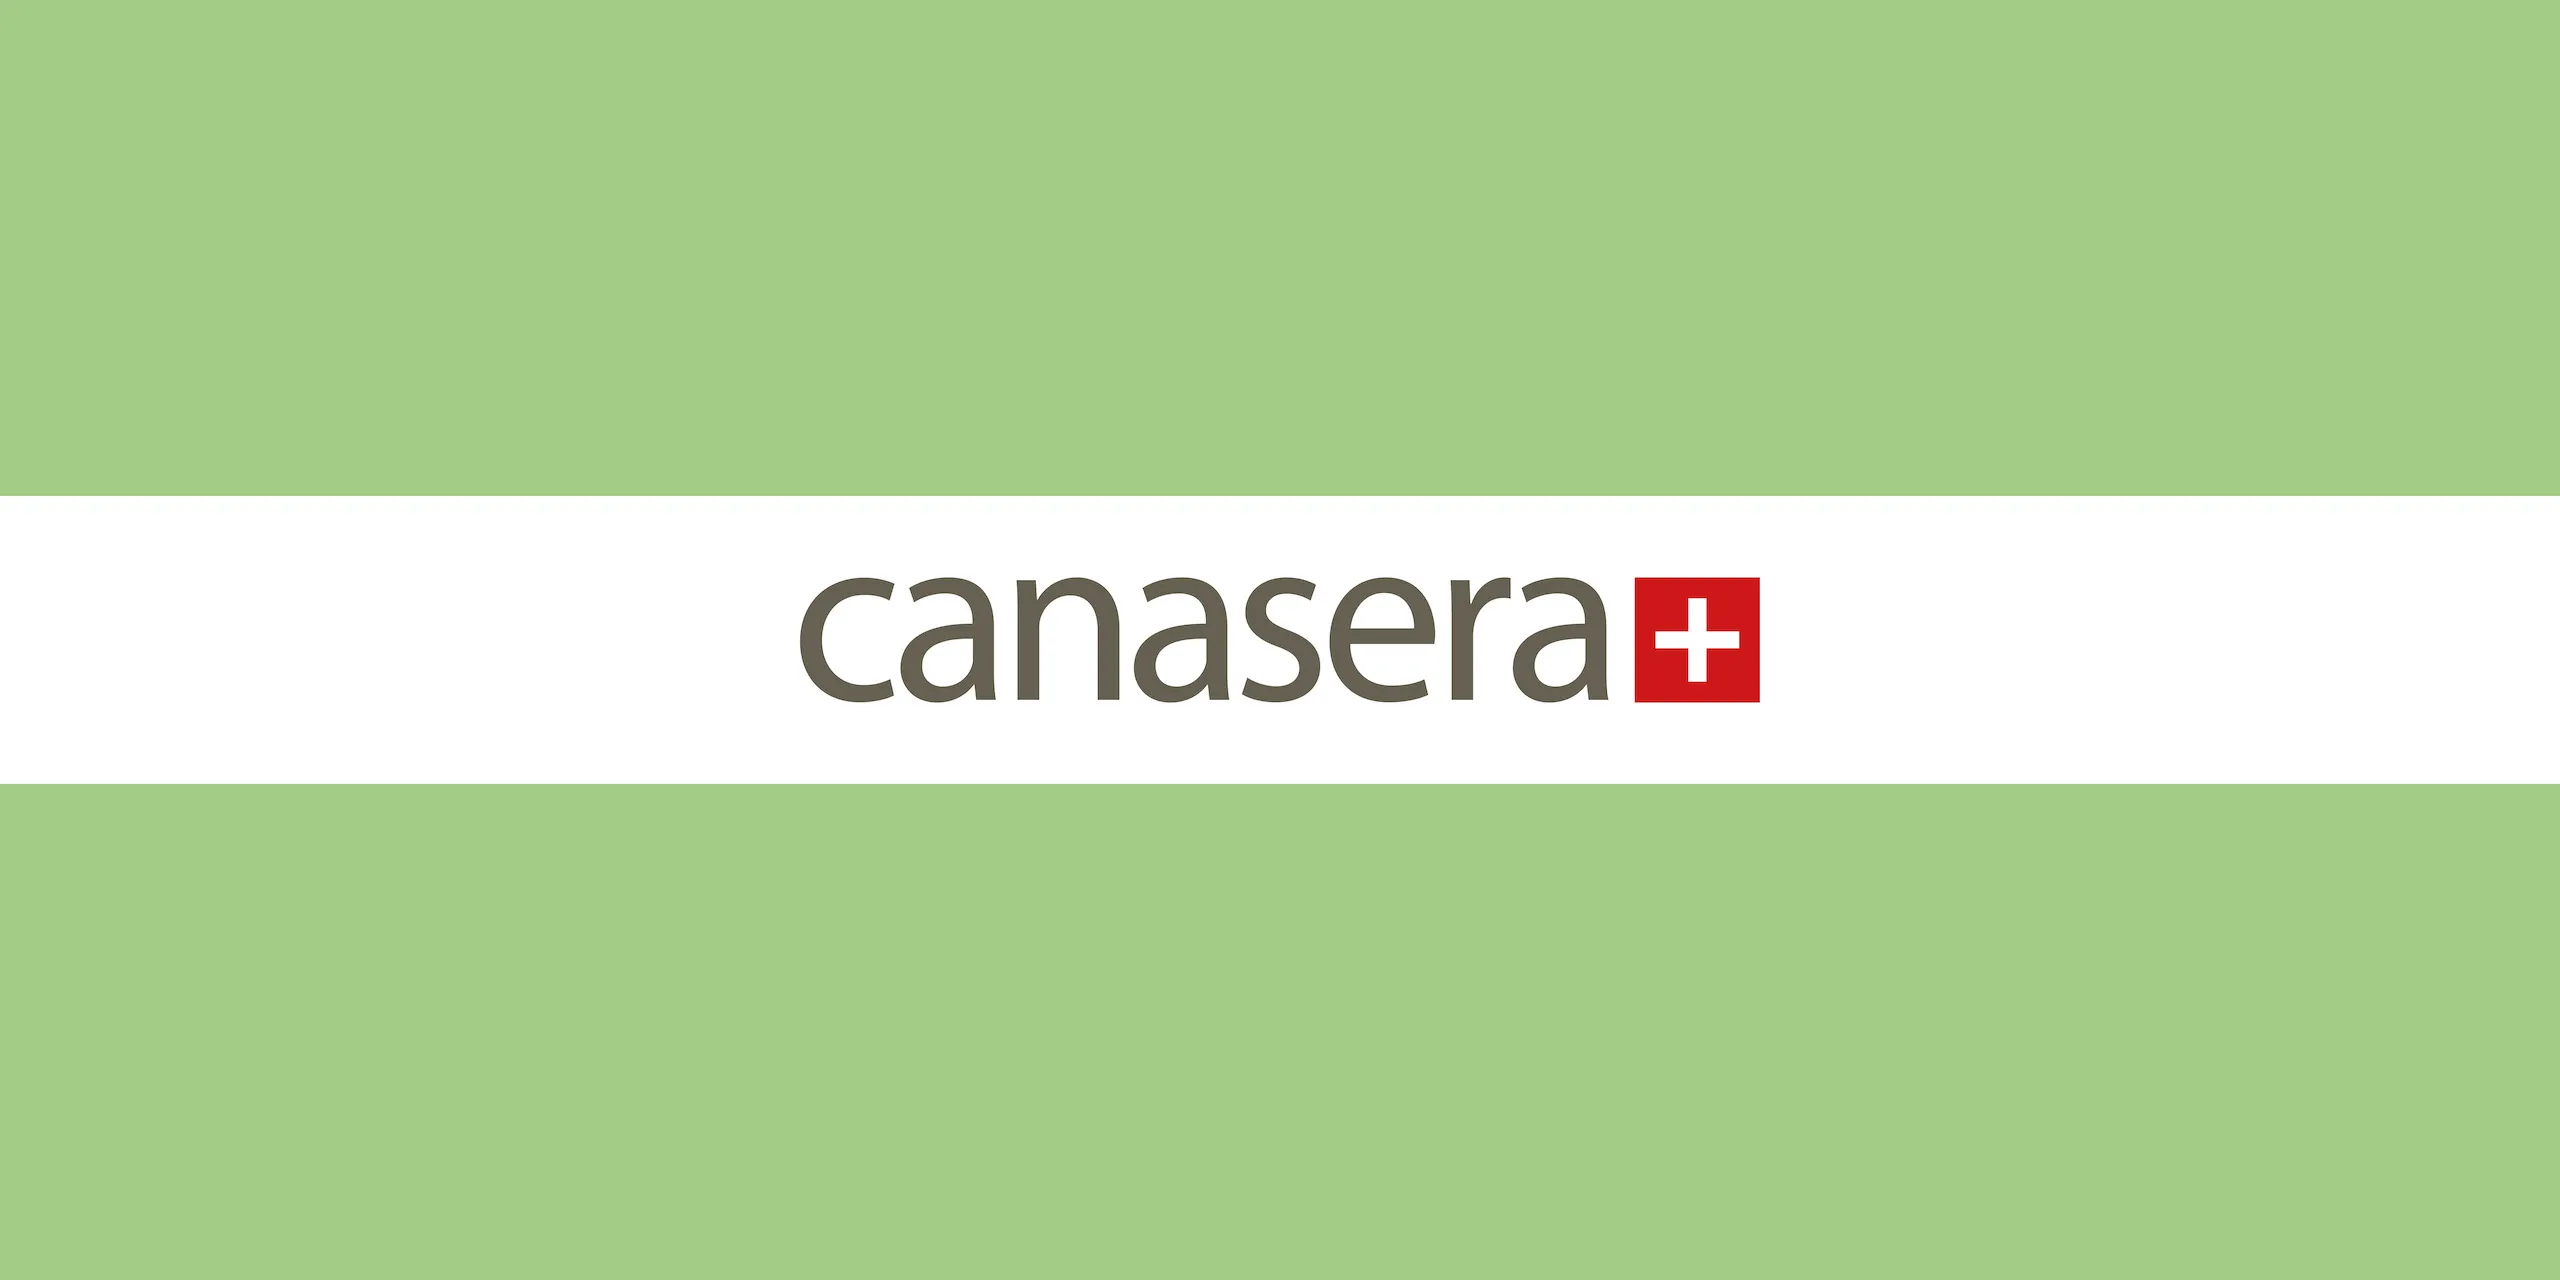 Canasera wordmark and red square with a white cross logo, on a white horizontal band against a mid-green field.